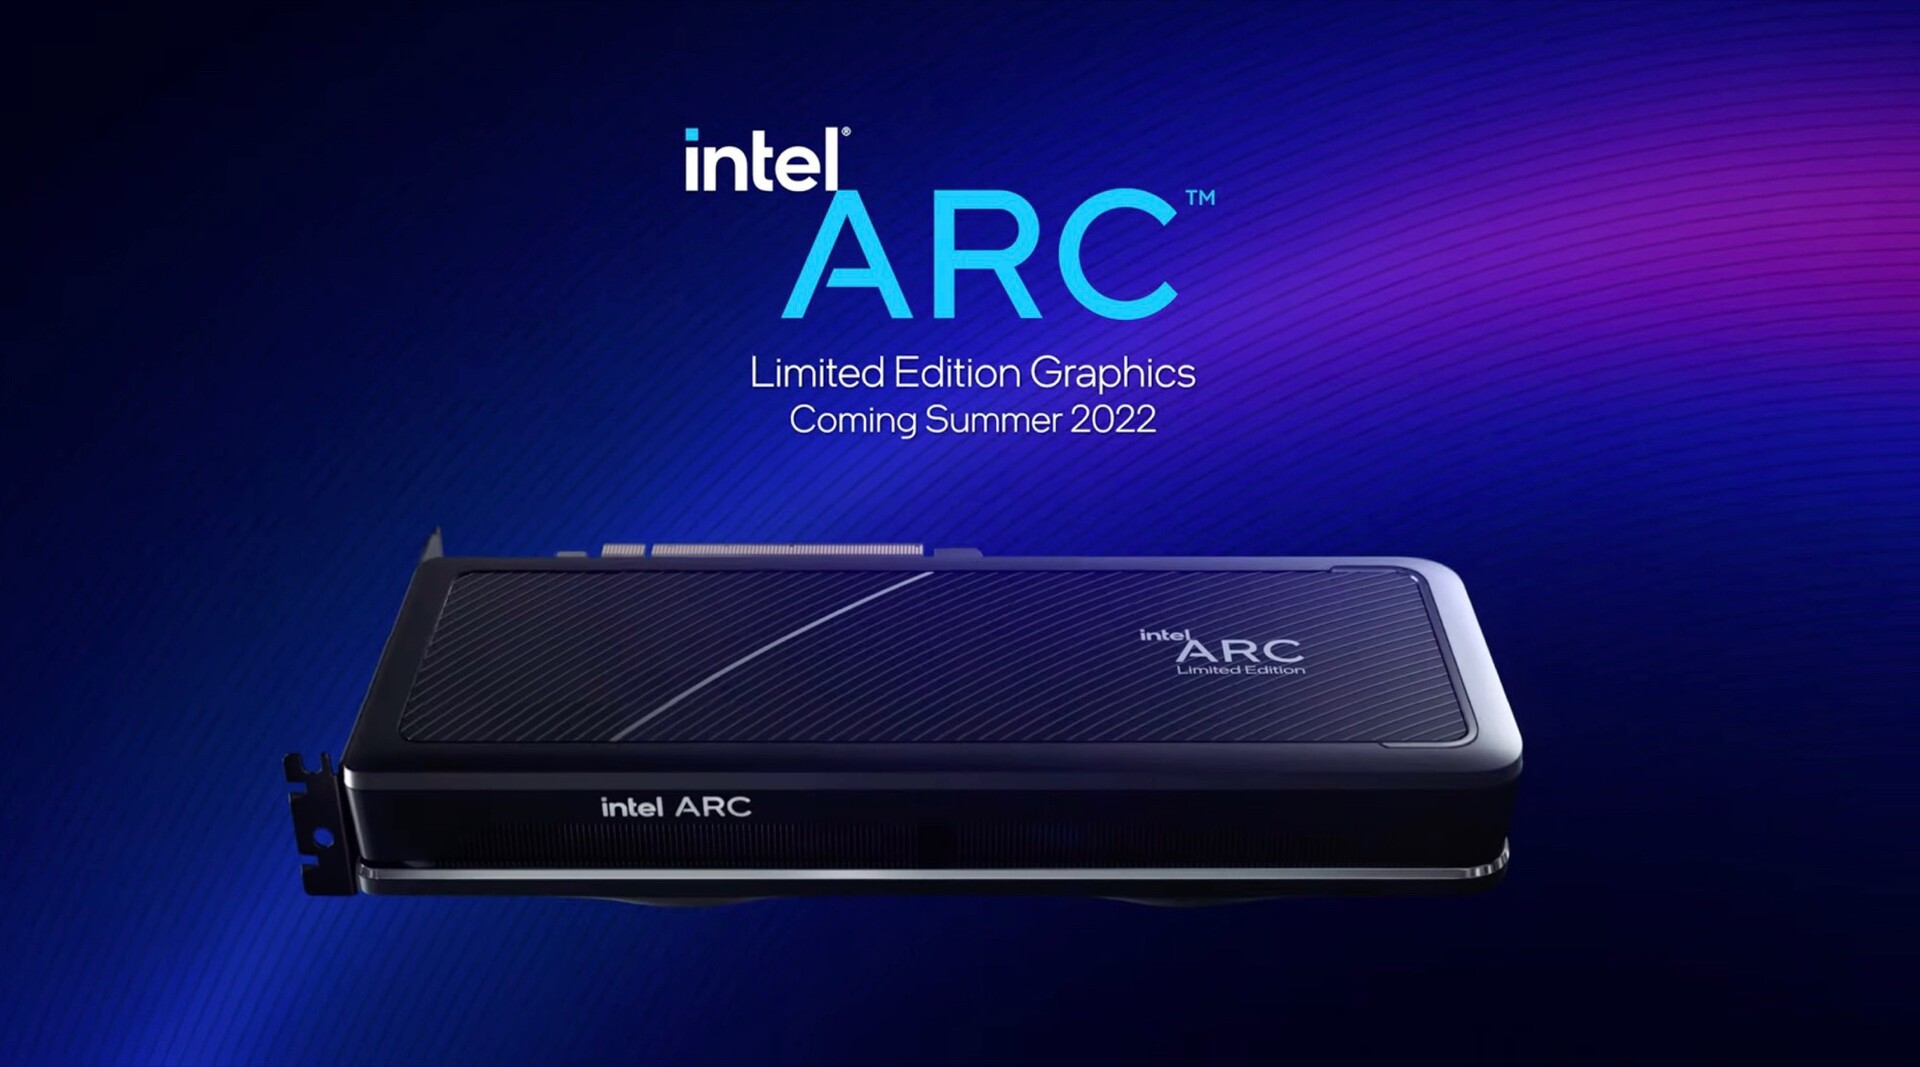 Intel unveils its first Arc Desktop Limited Edition graphics card